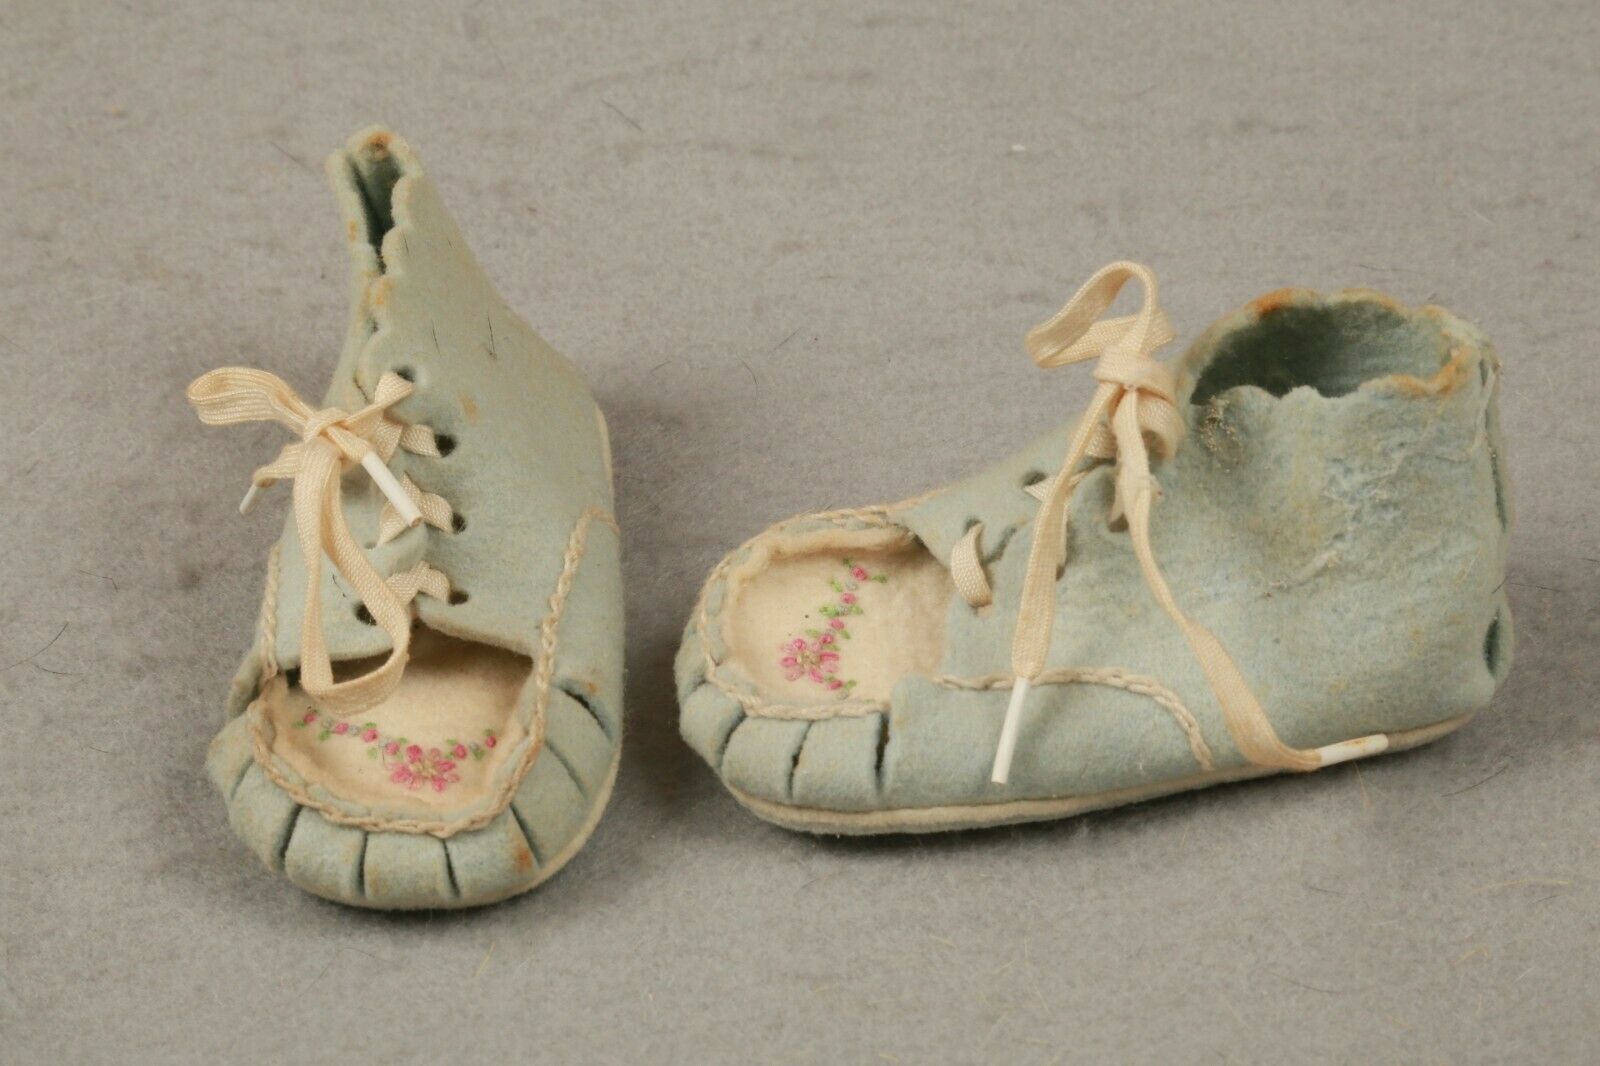 Vintage Baby Toddler Blue Ivory Felt Tie Up Shoes Booties W/ Floral Embroidery